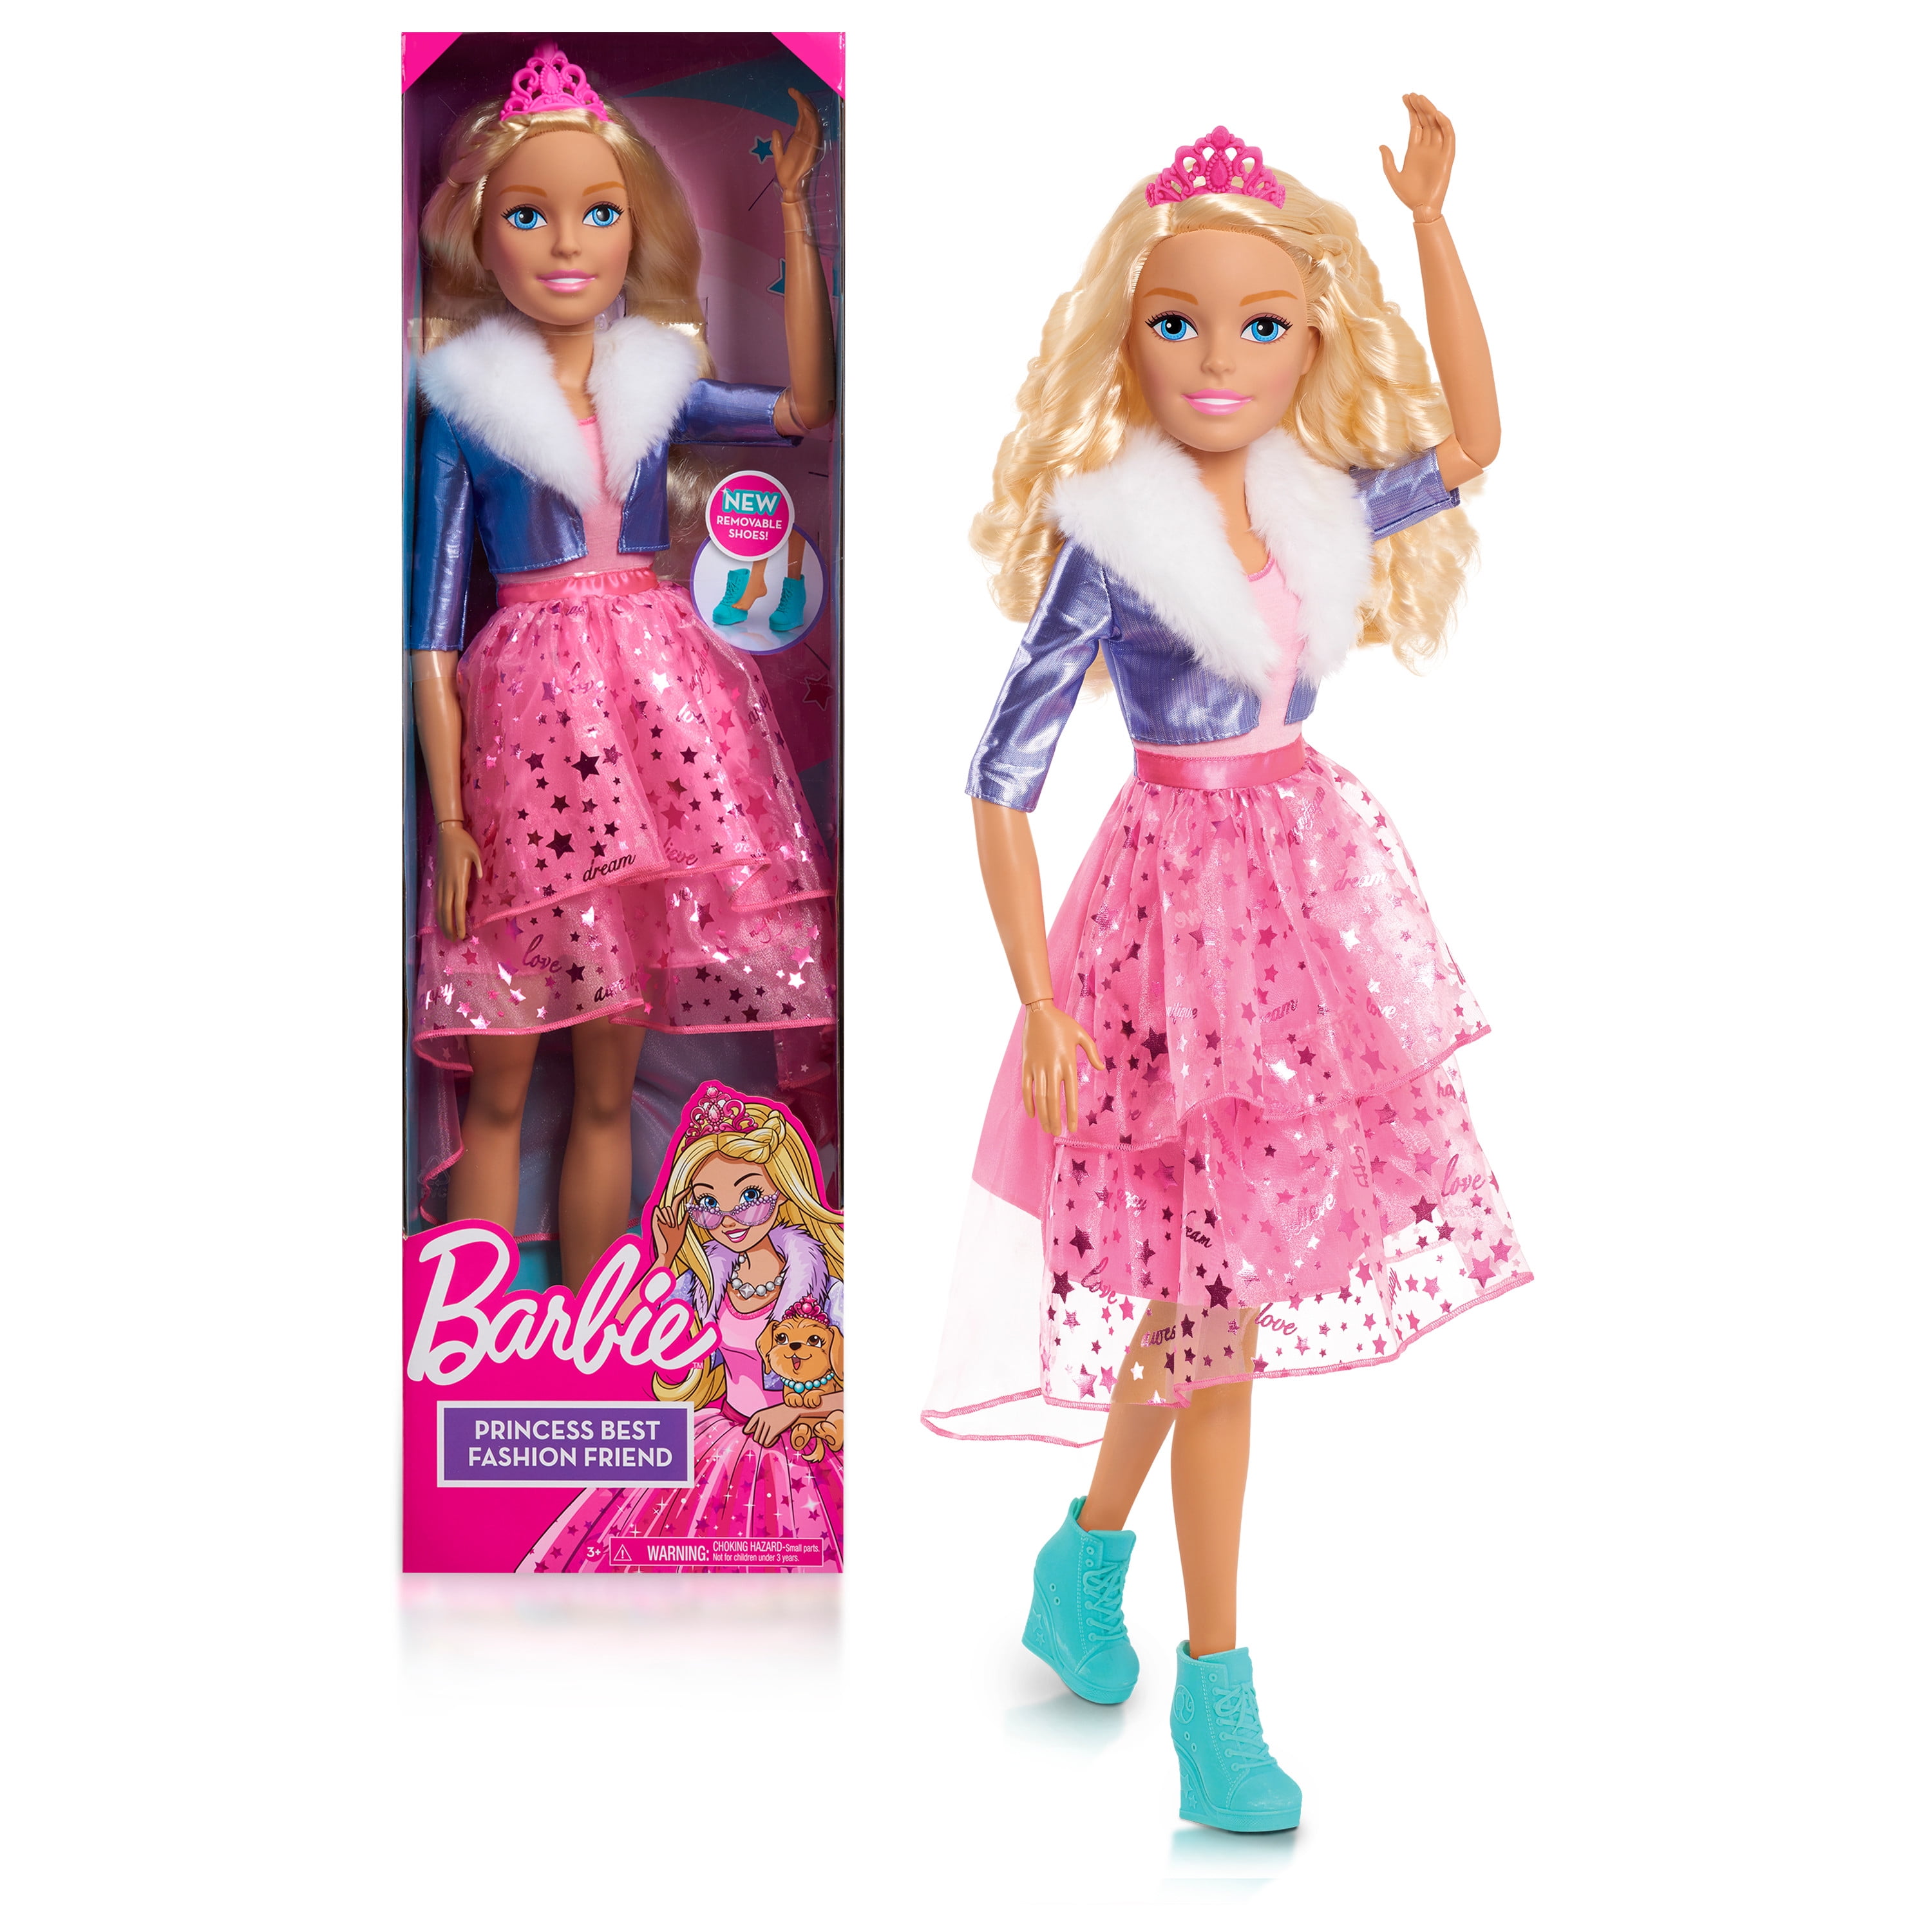 Barbie 28-inch Best Fashion Friend Princess Adventure Doll, Blonde Hair, Kids Toys for 3 Up, Gifts and Presents - Walmart.com